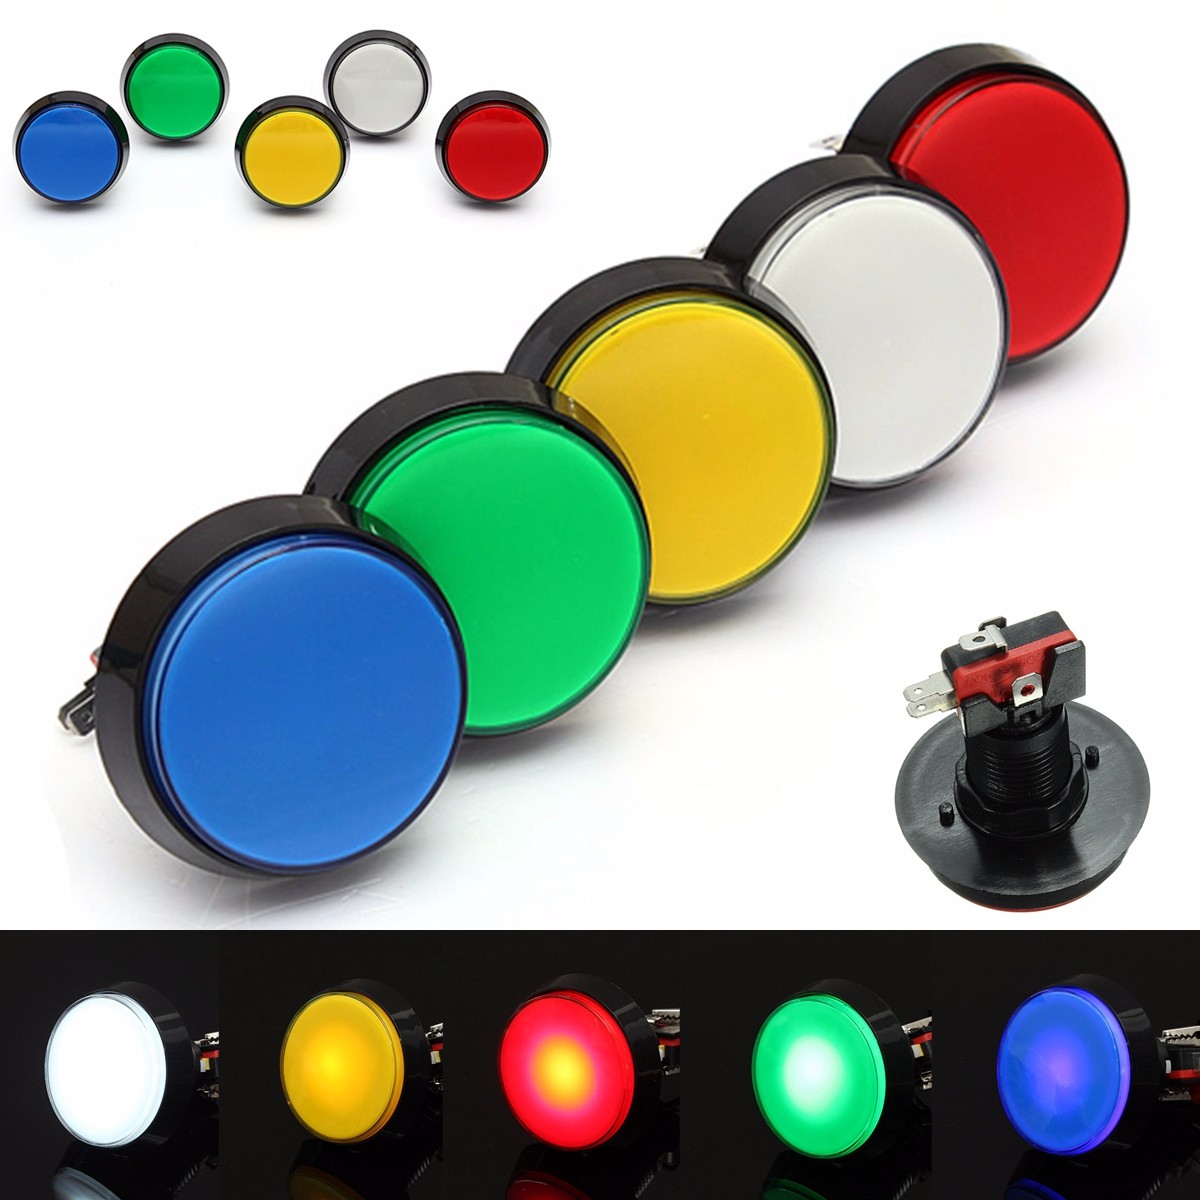 1pc 60mm LED Light Big Round Arcade Video Game Player Push Button Switch Lamp_TI 